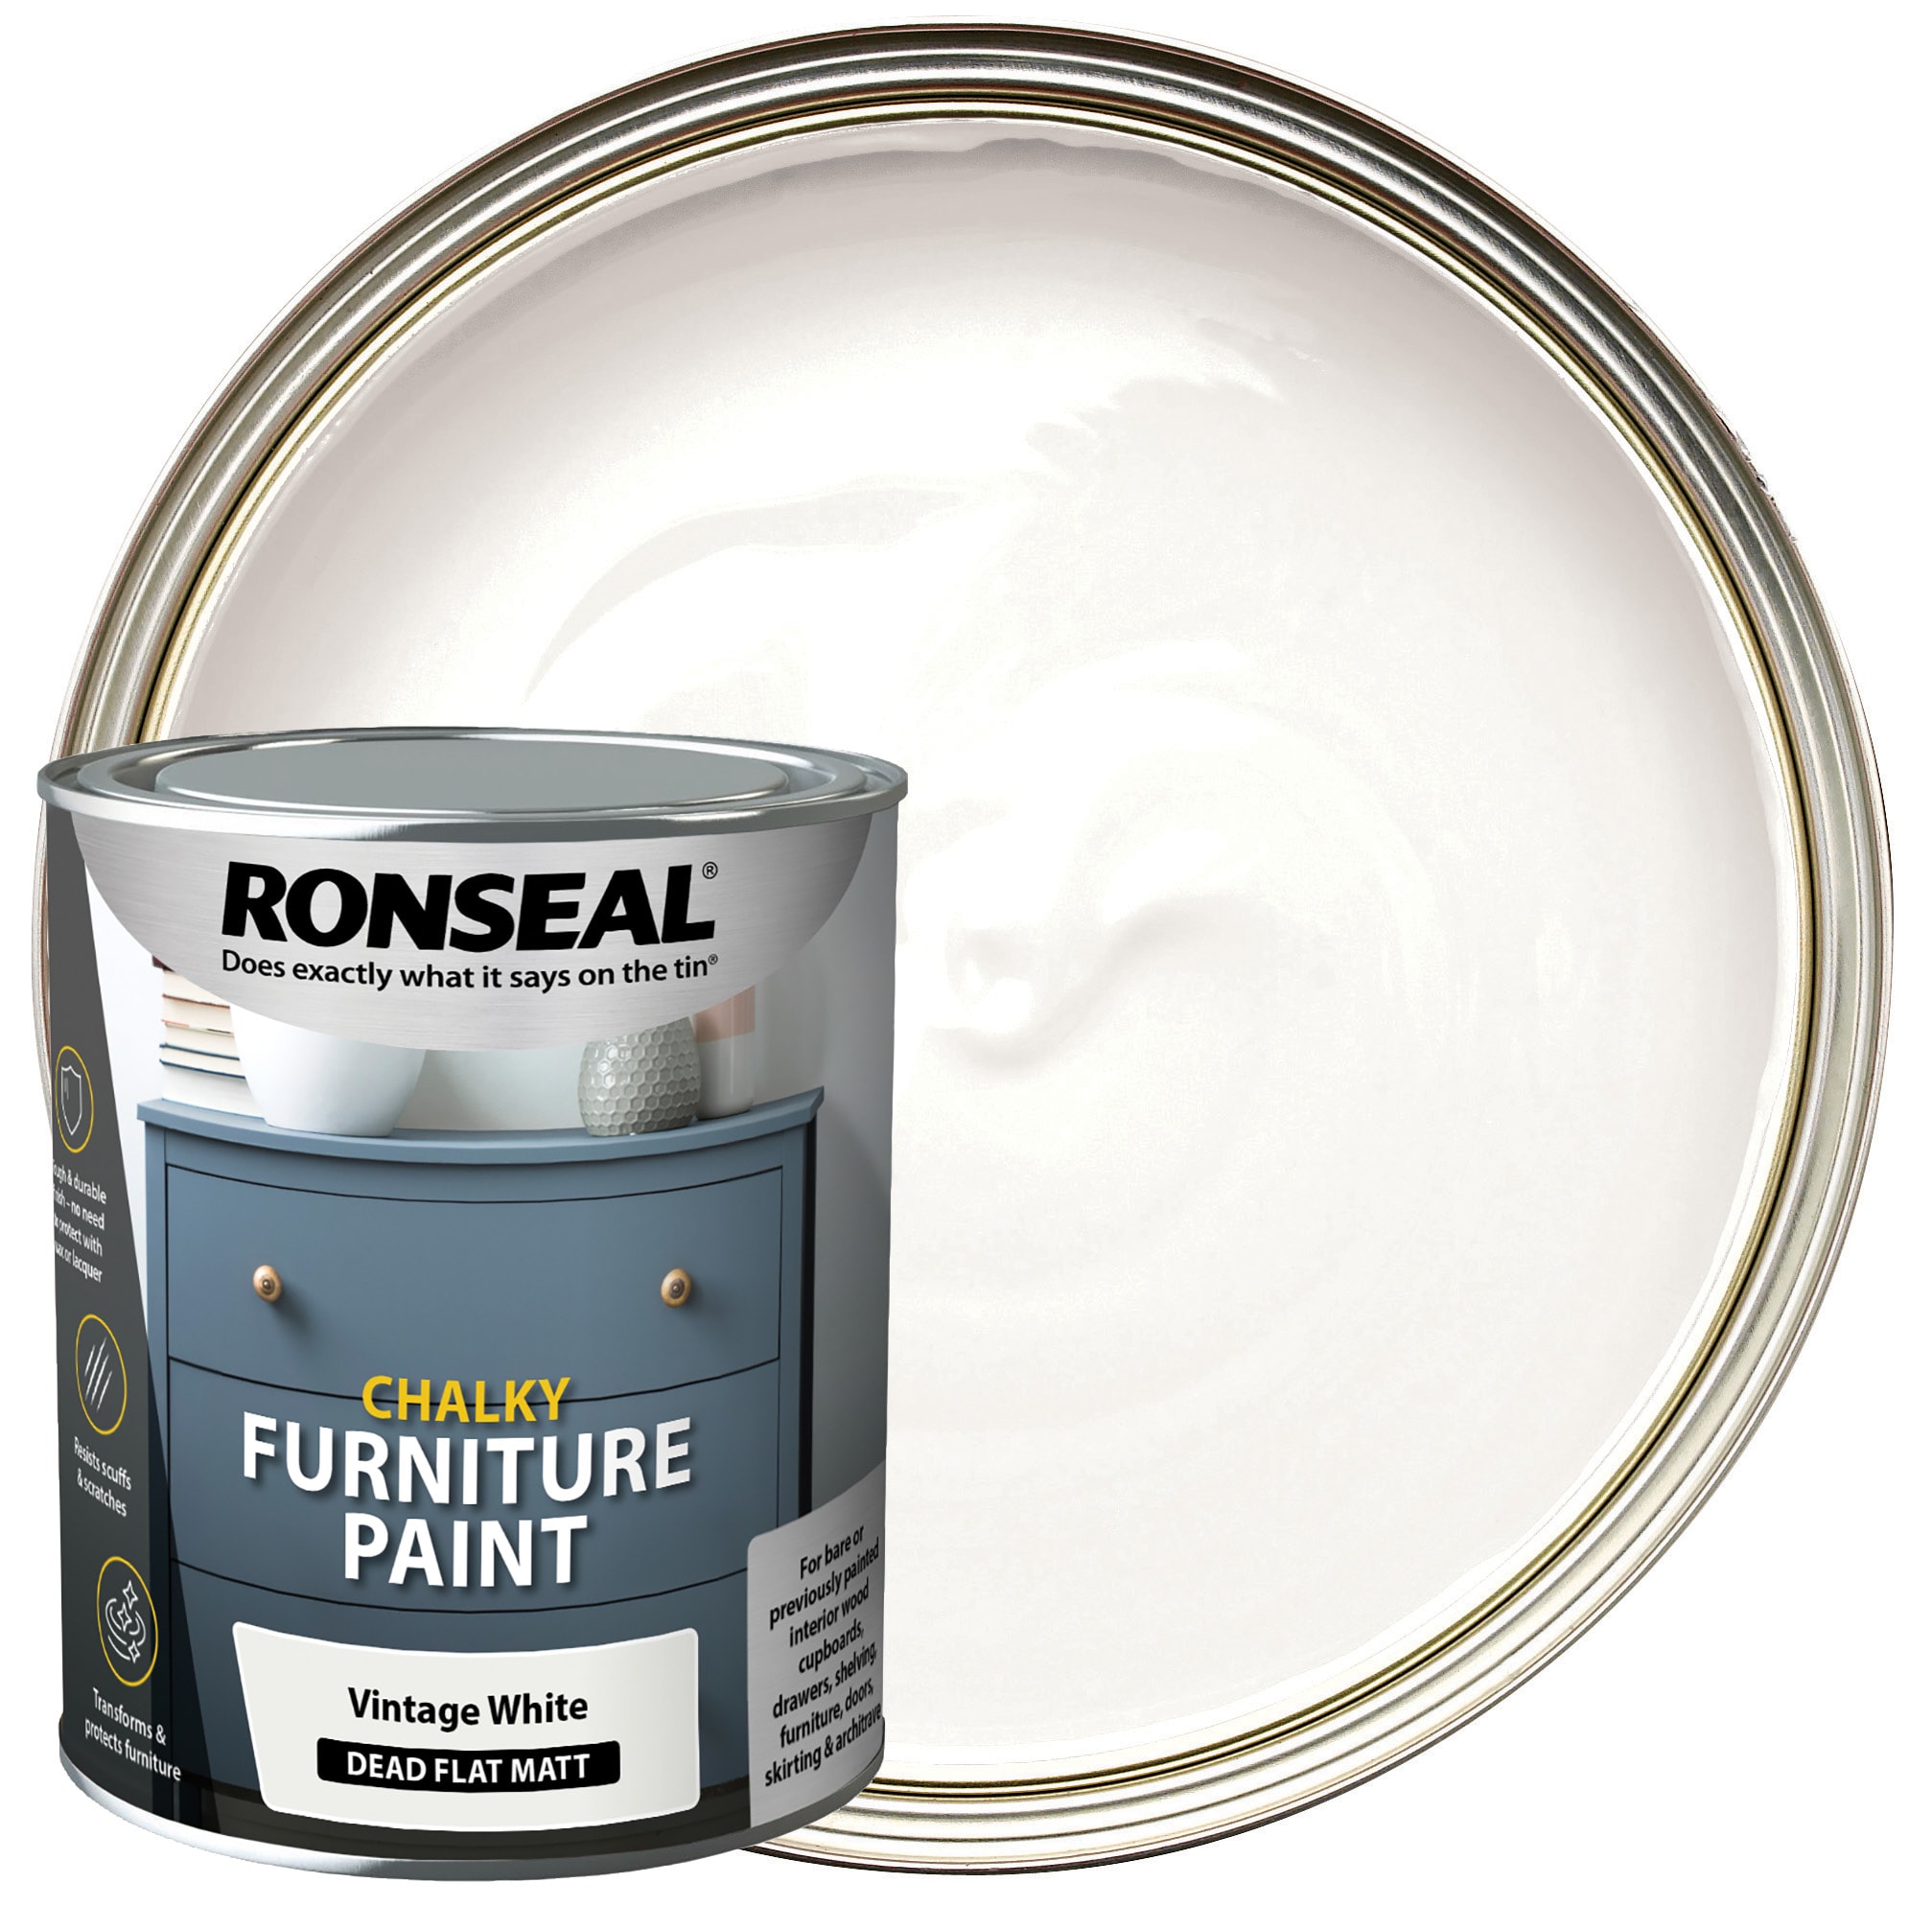 Ronseal Chalky Furniture Paint - Vintage White -